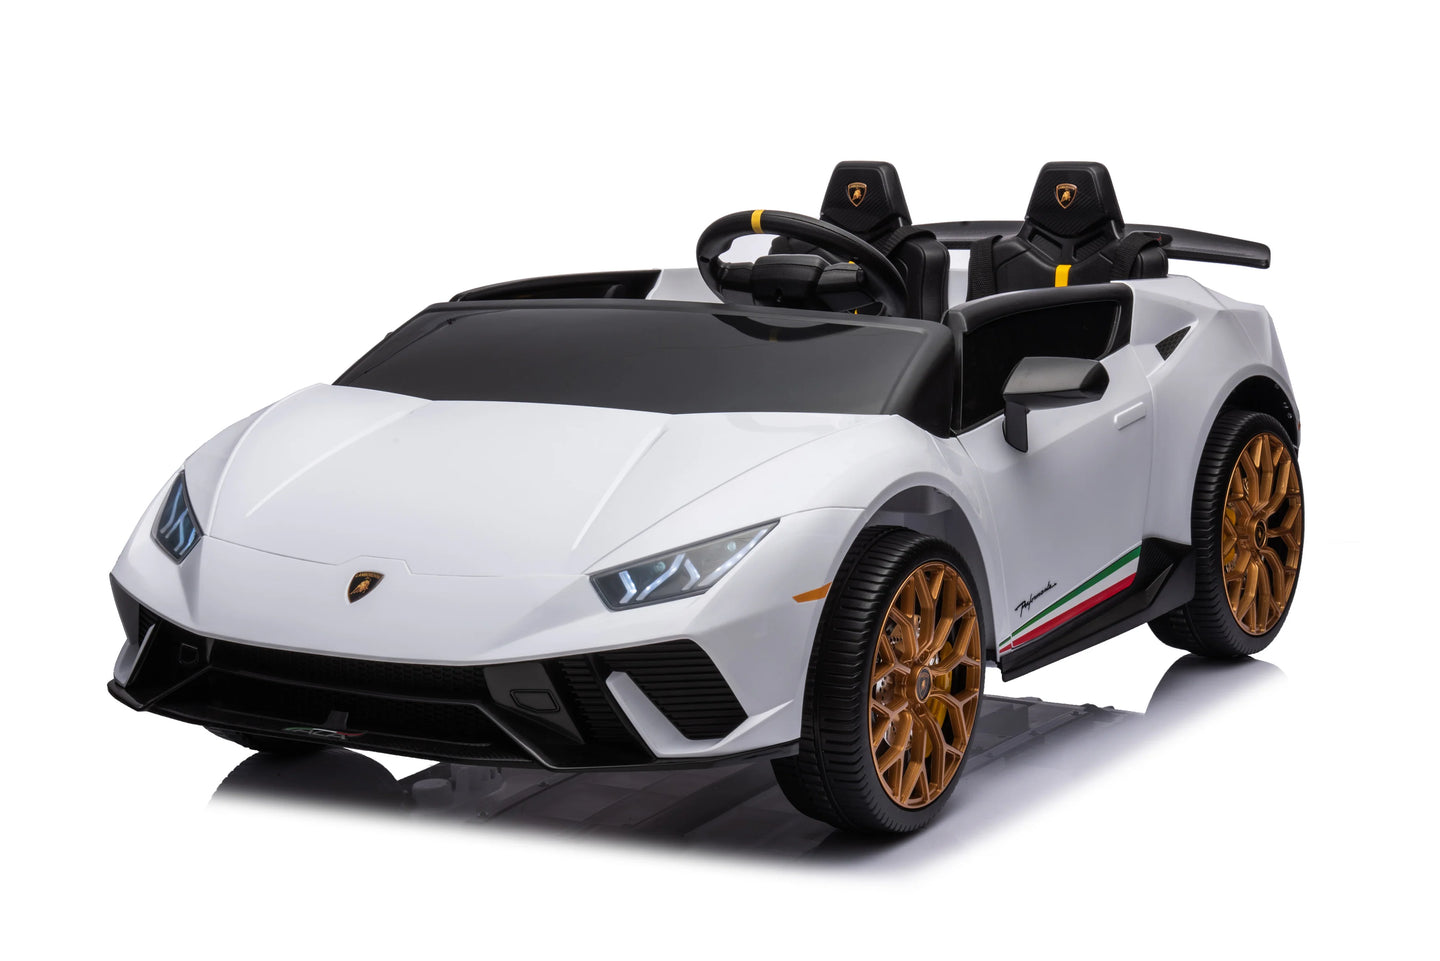 2025 Upgraded Licensed 24V Huracan Lamborghini 2 Seater XXL | 4x4 | Special Edition | Leather Seats | Rubber Tires | Remote